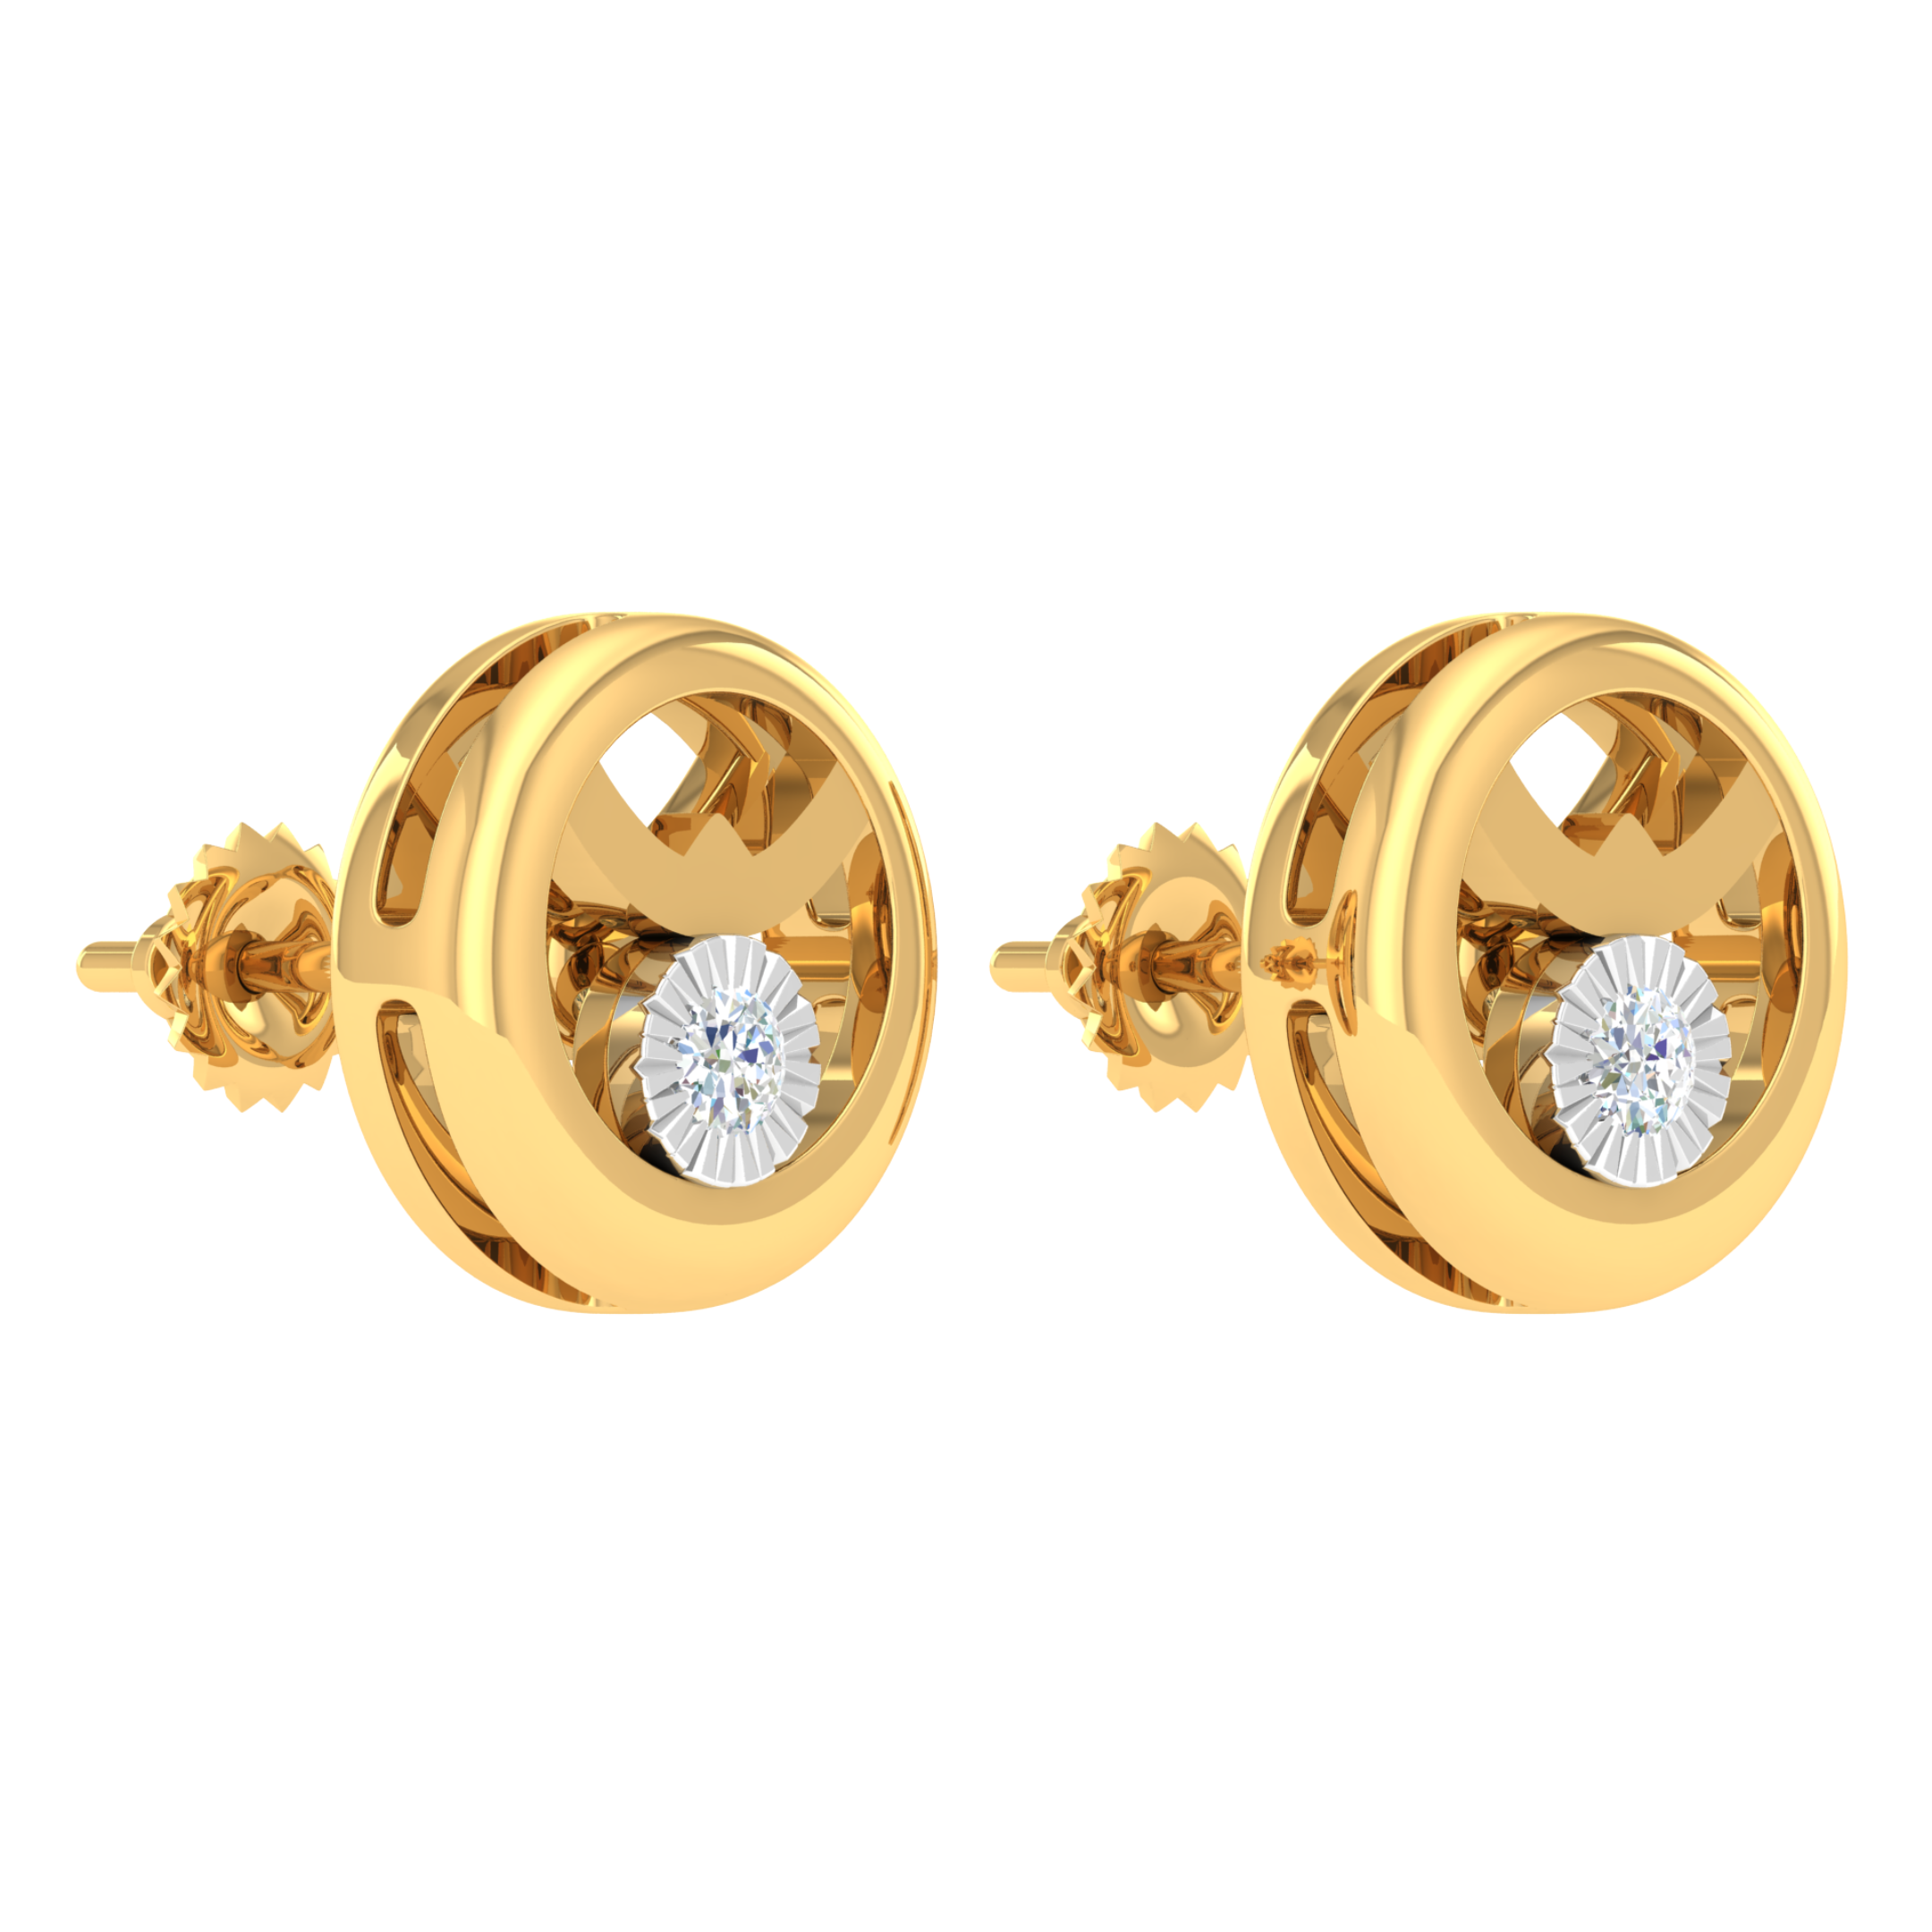 18KT YELLOW GOLD LUCIA RRAL DIAMOND EARRINGS